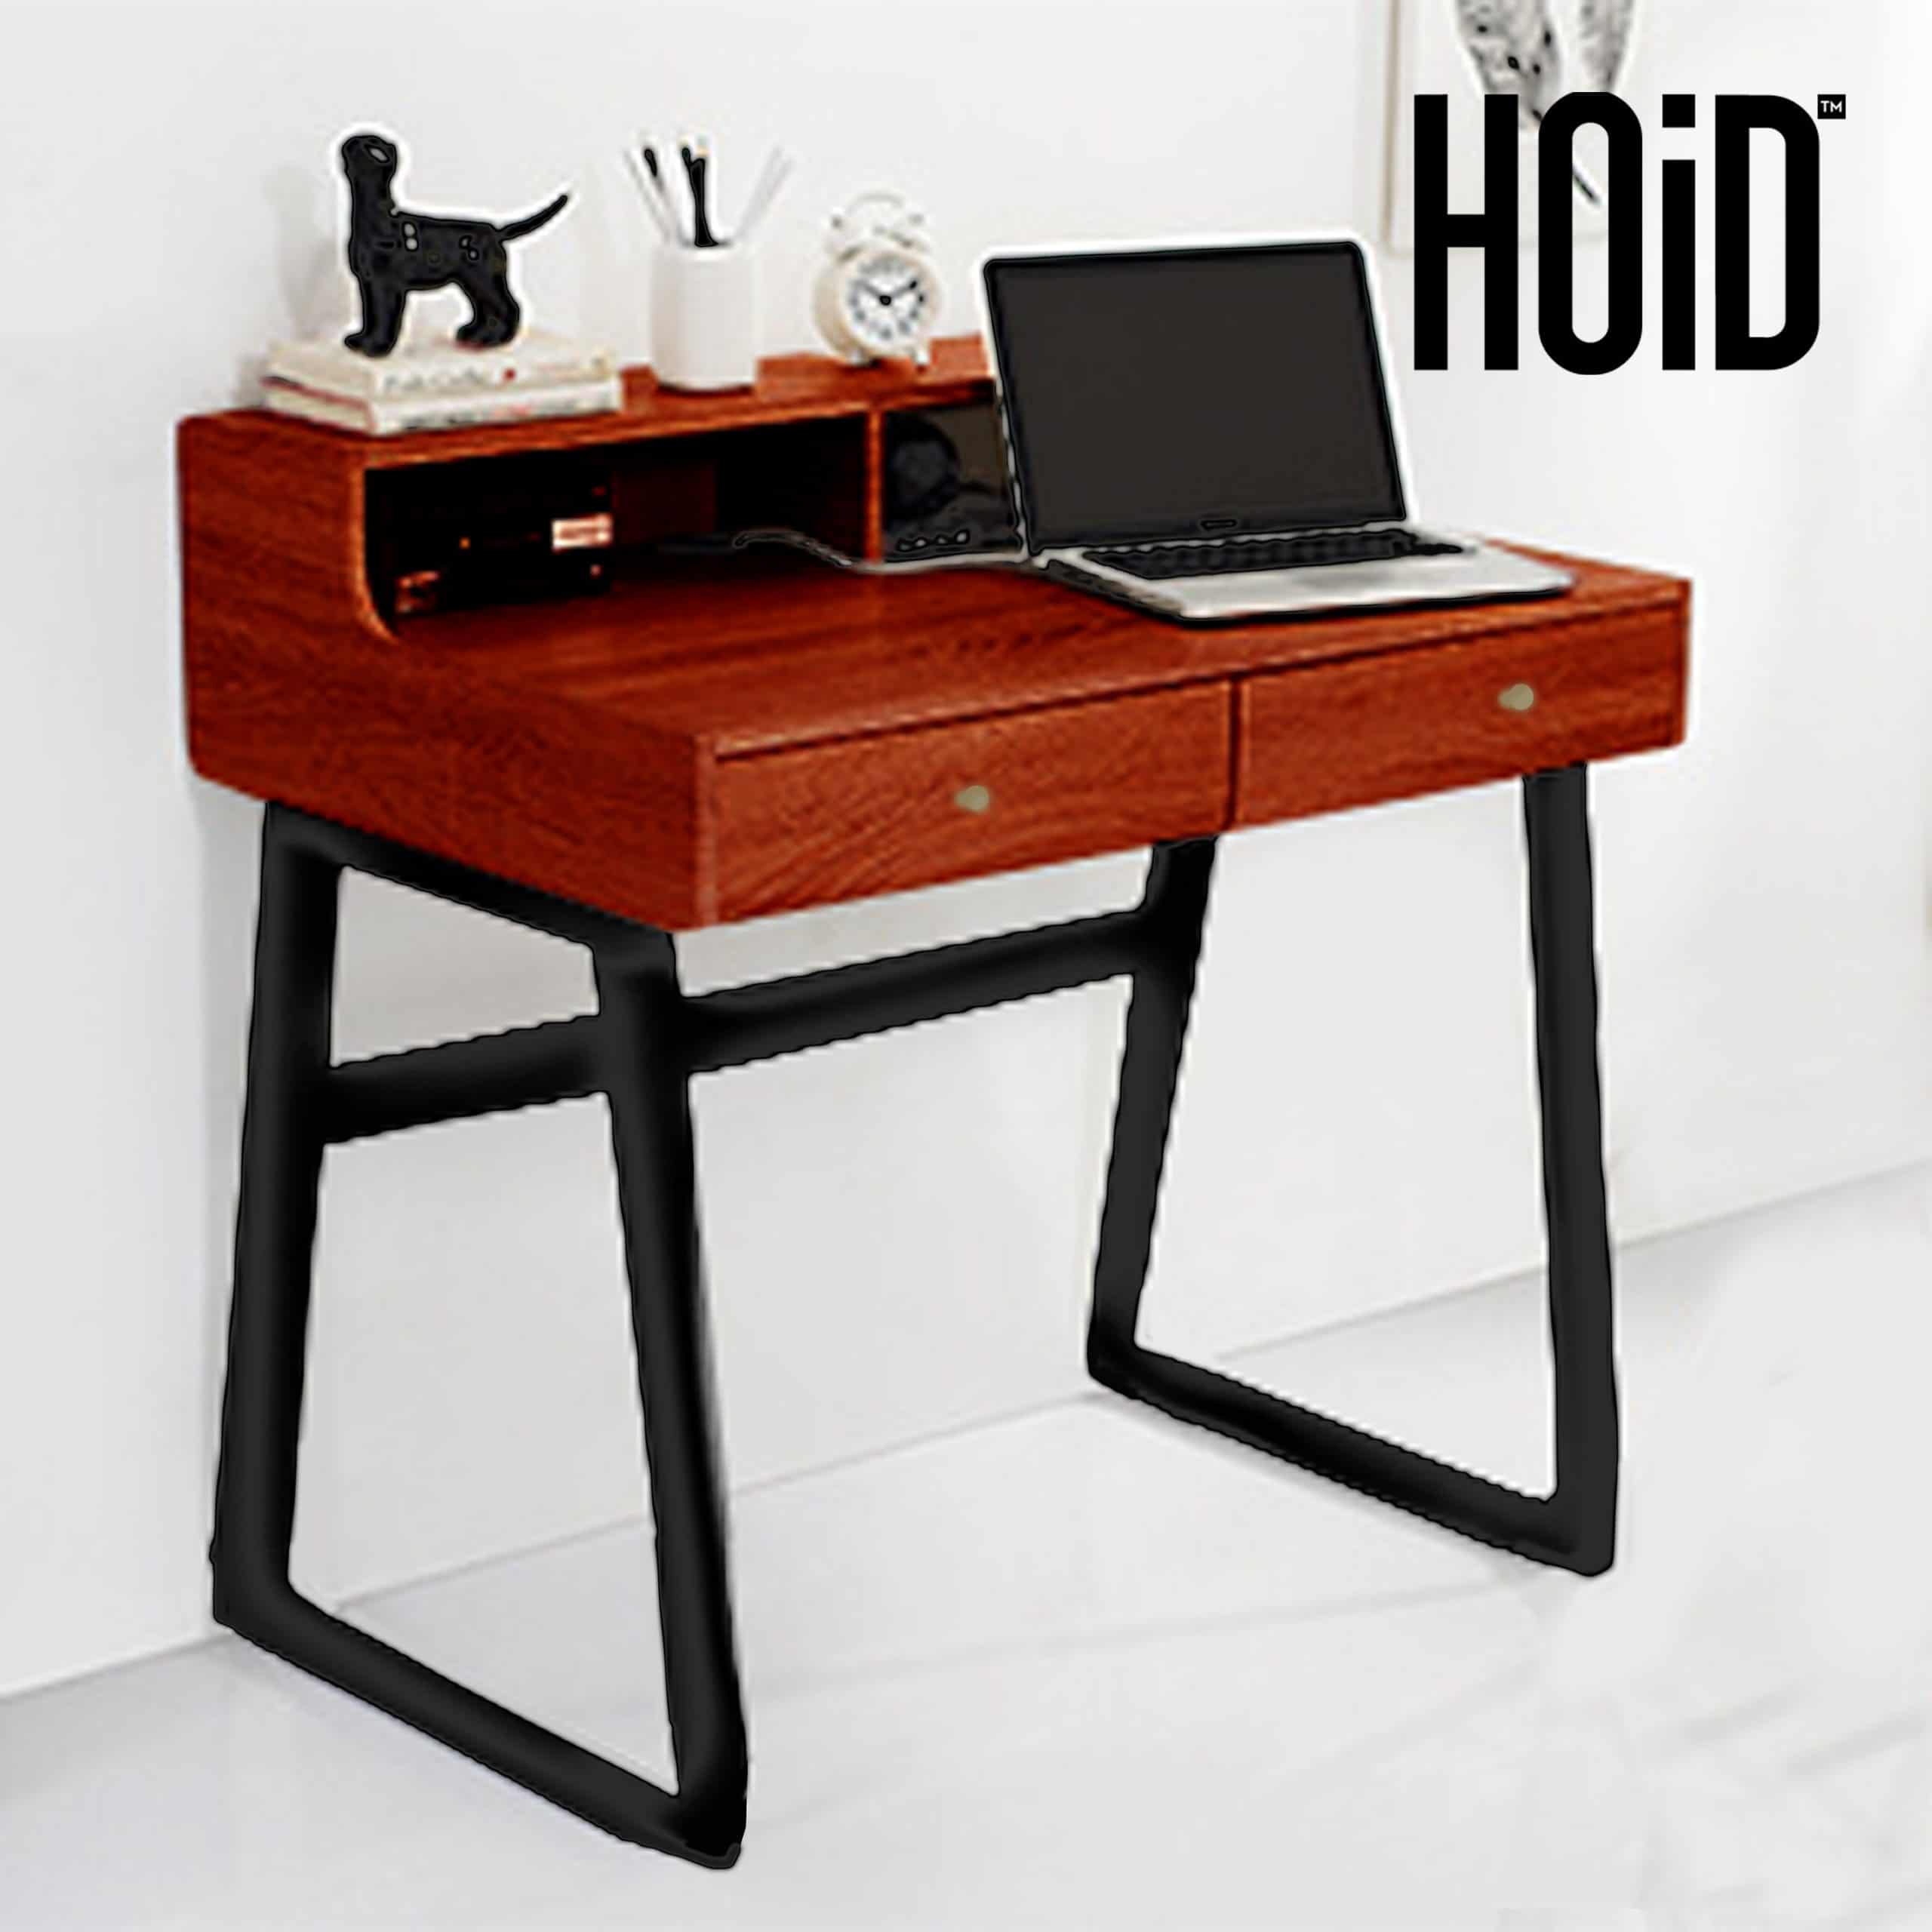 terry-study-table-with-2-drawers-1-scaled-2.jpg